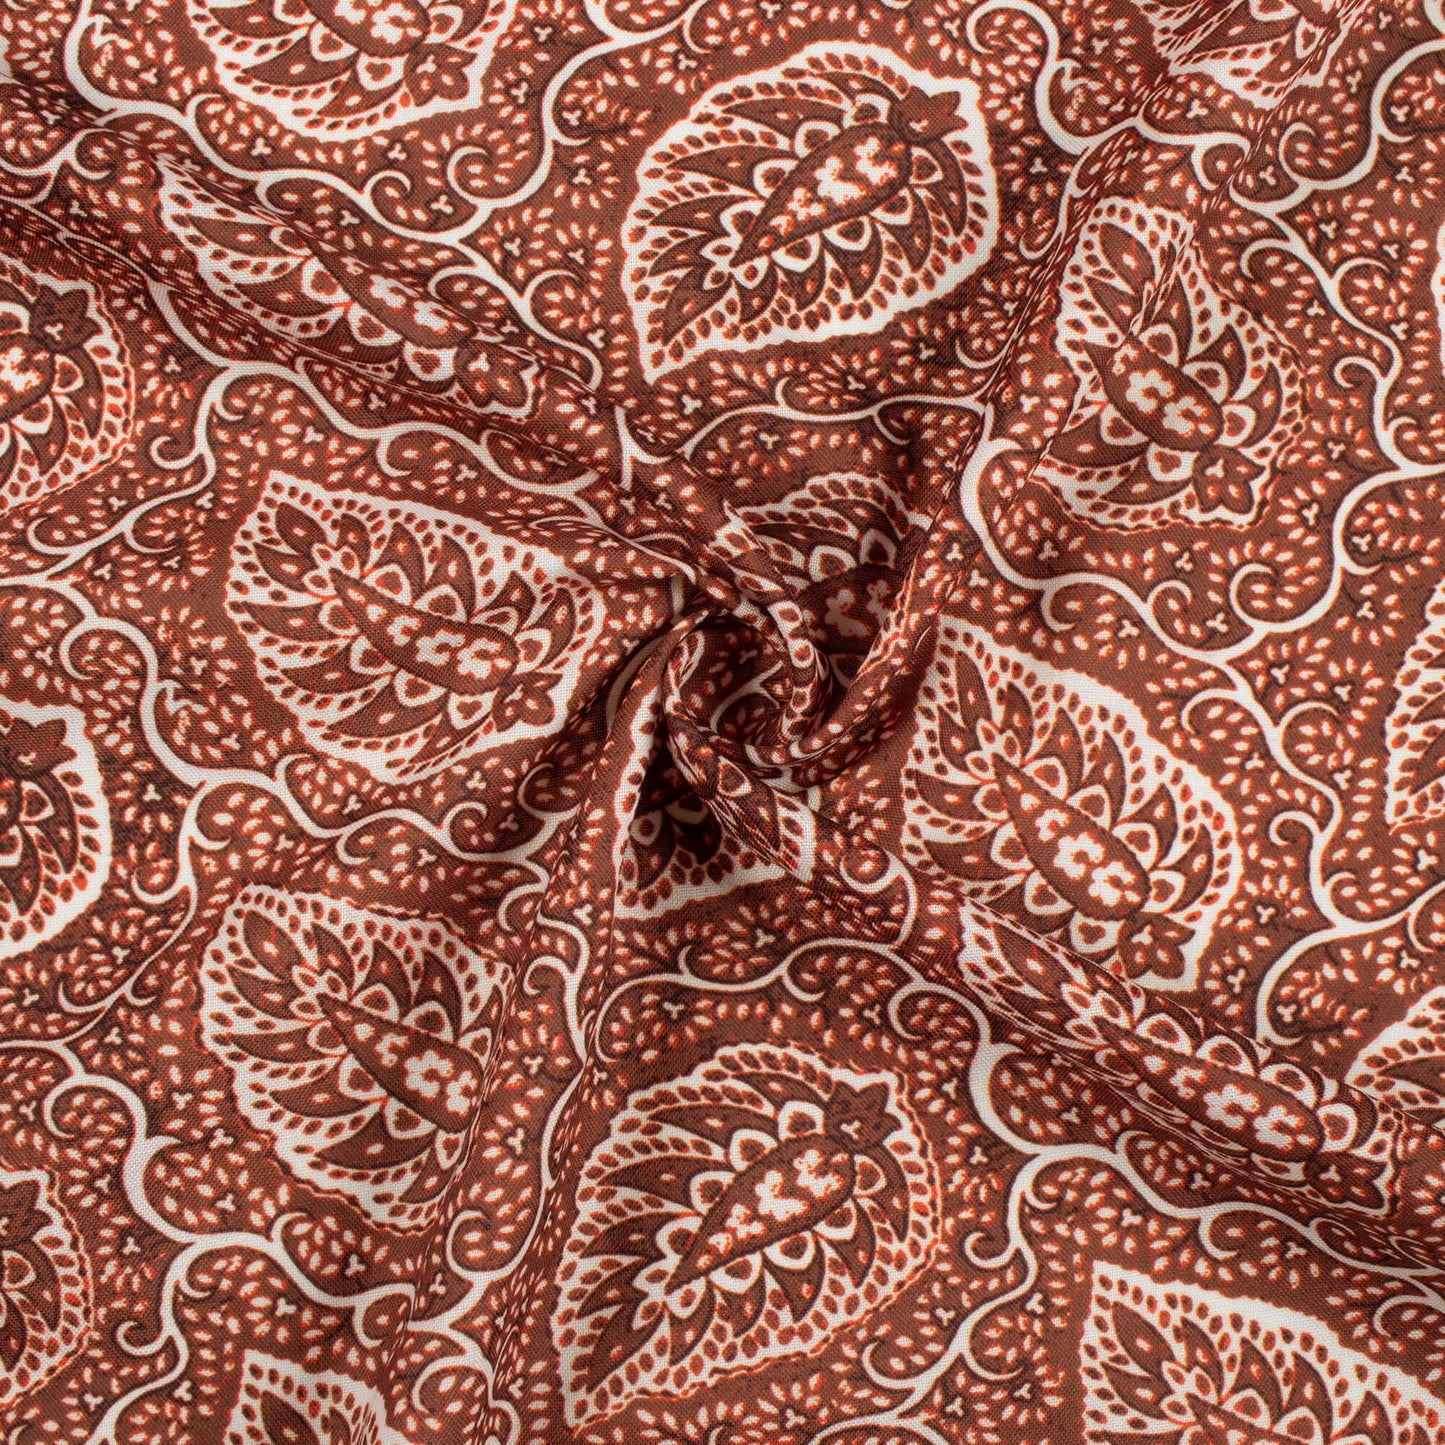 Vermilion Red And White Leaf Pattern Digital Print Rayon Fabric